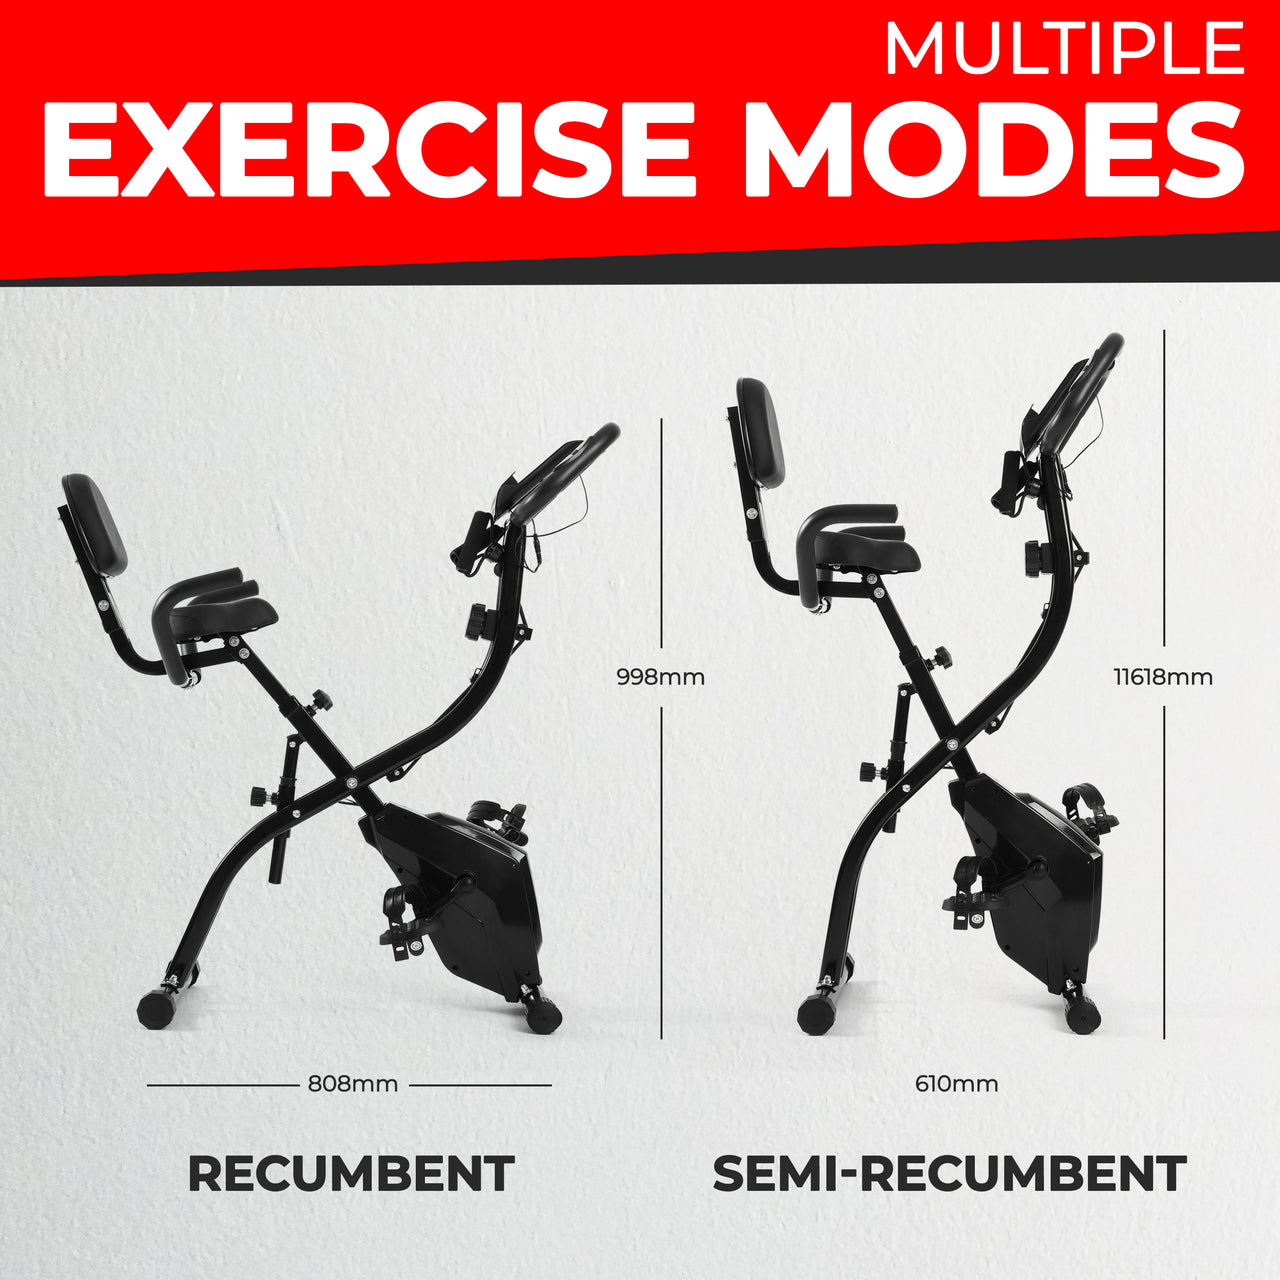 VRAi Fitness SXB-350 Folding Exercise Bike With Bluetooth App Compatibility  [Ultimate Fitness Bundle]